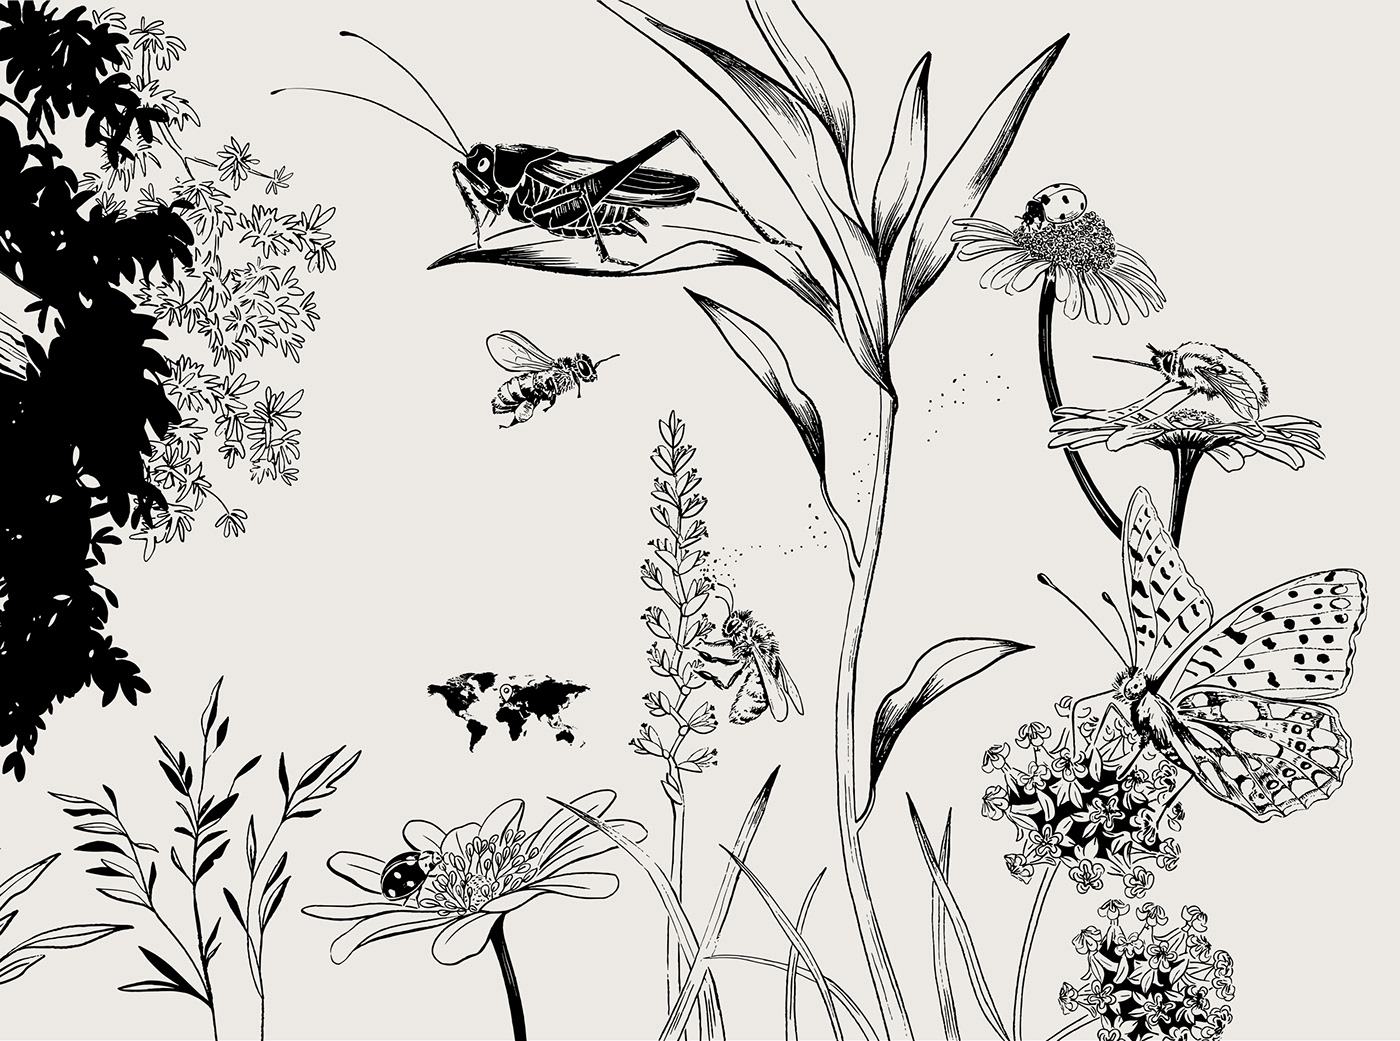 Vectorillustration insect Nature animals forest Flowers bee museu do amanha sensory odyssey wallillustration